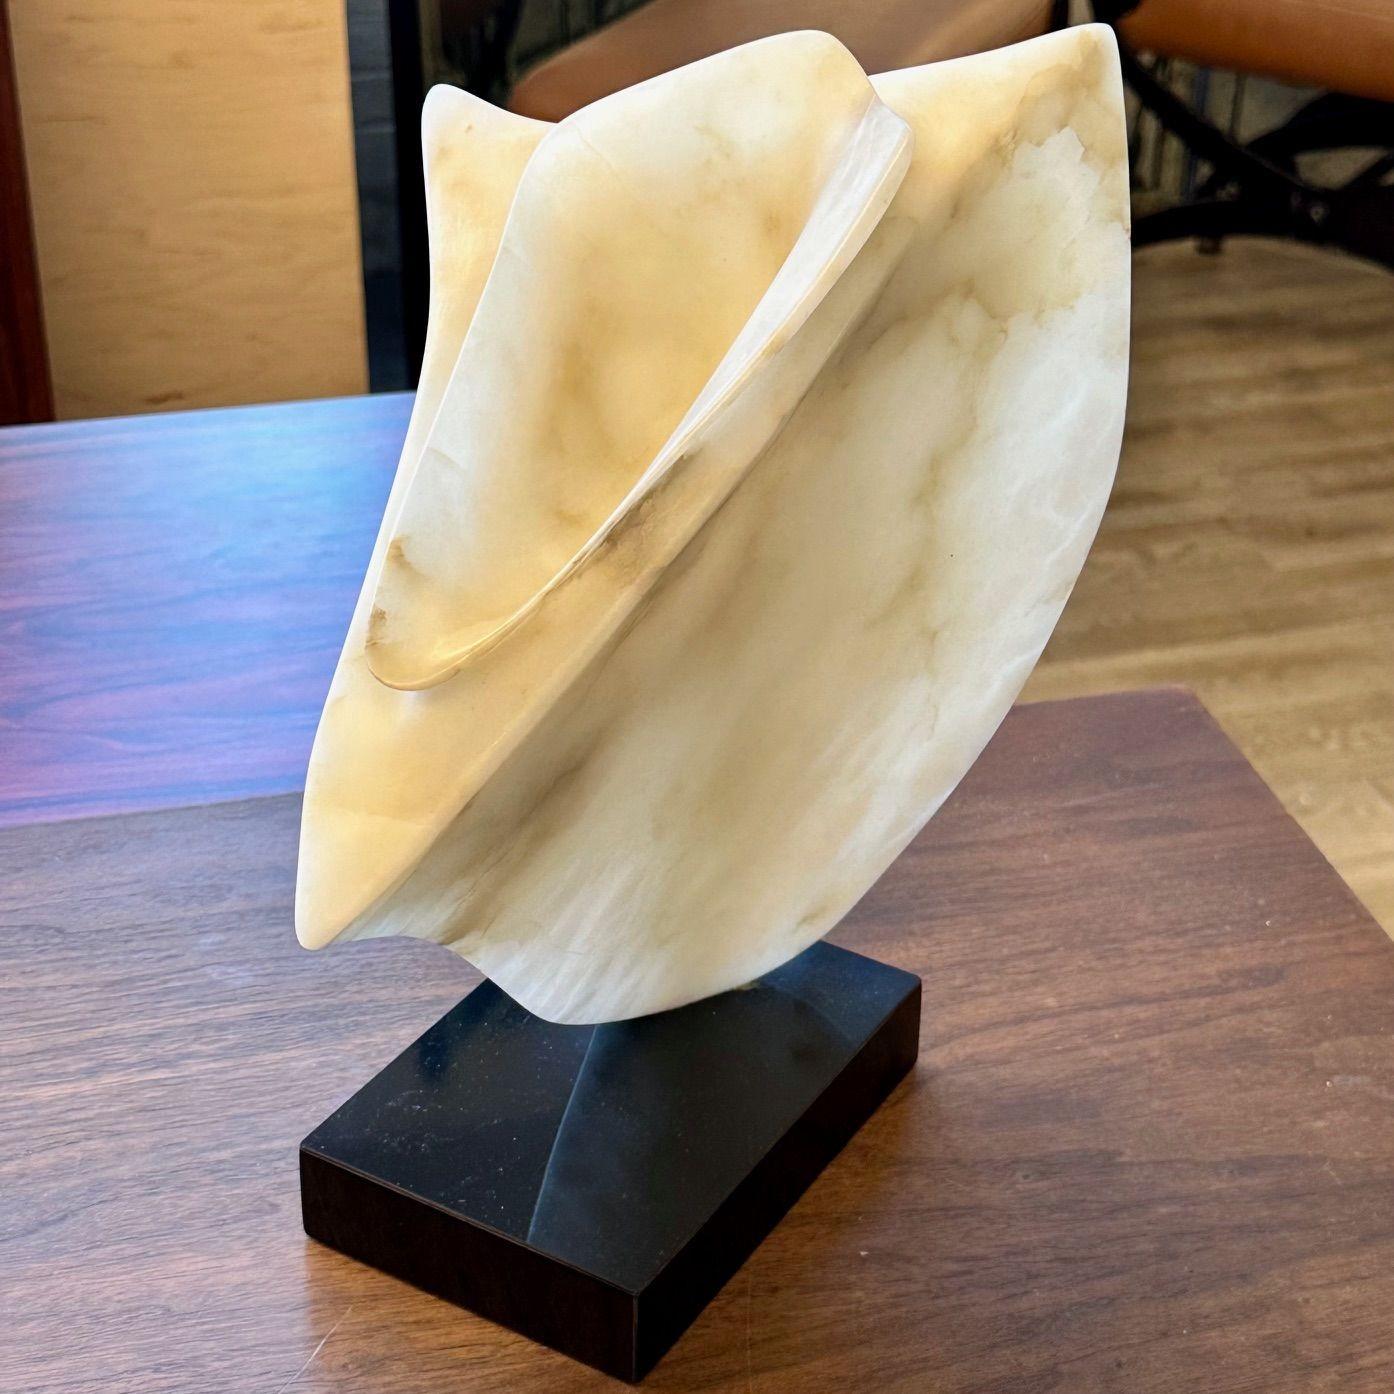 Contemporary Abstract Stone / Marble Sculpture on Base, Organic Form, 1990s
Base, 1990s

13.25H x 9W x 7D